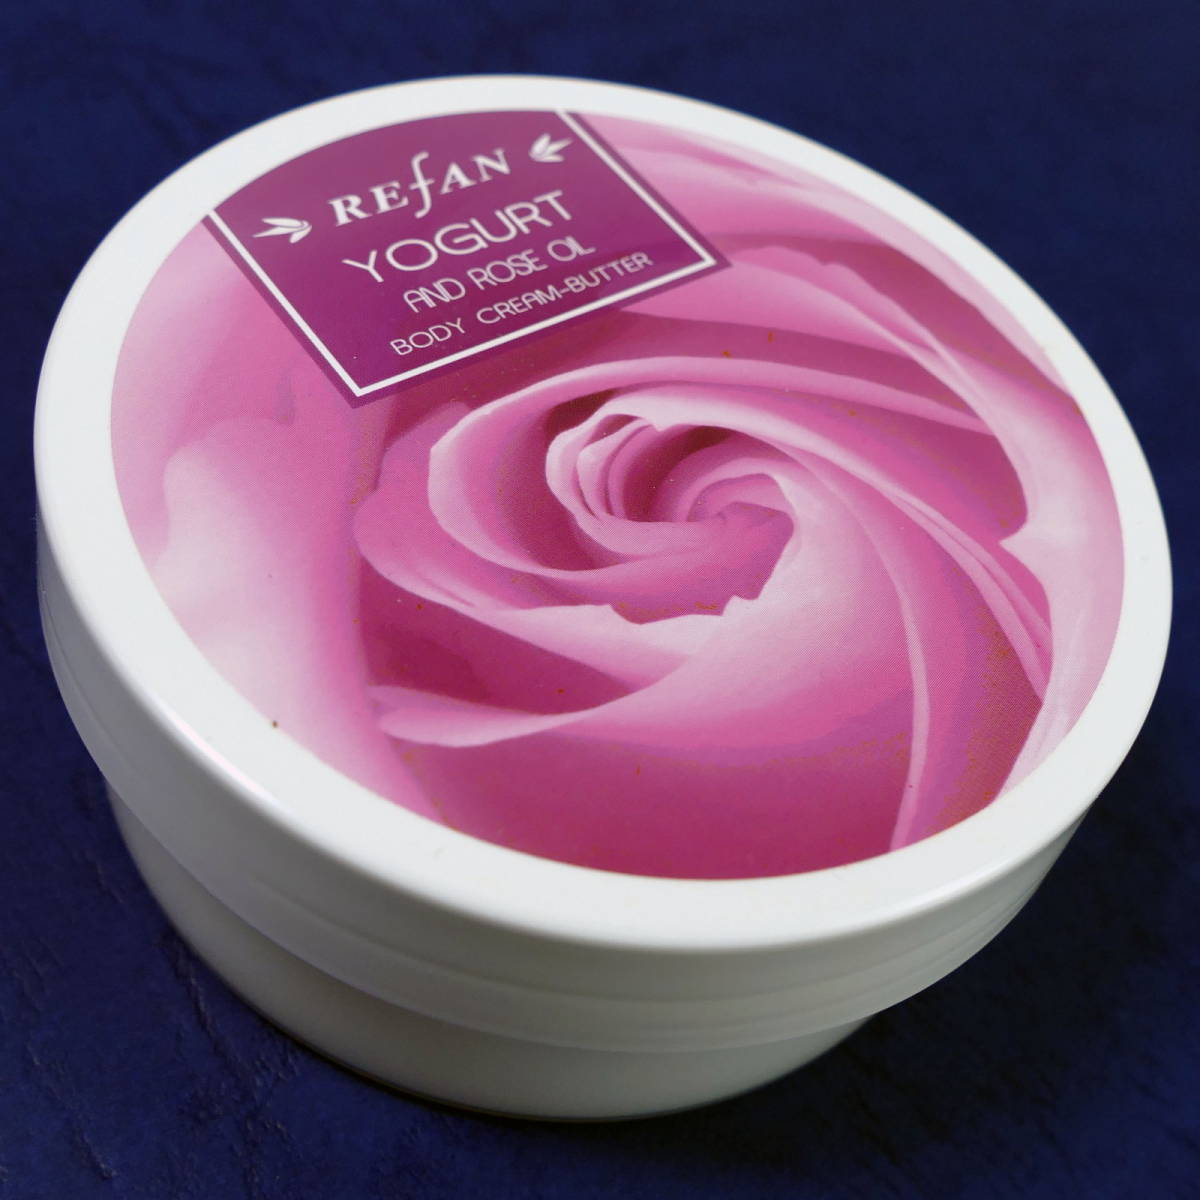 ** 2 piece set . profit! BVLGARY aREFAN company manufactured body cream butter ( yoghurt & rose oil ) **